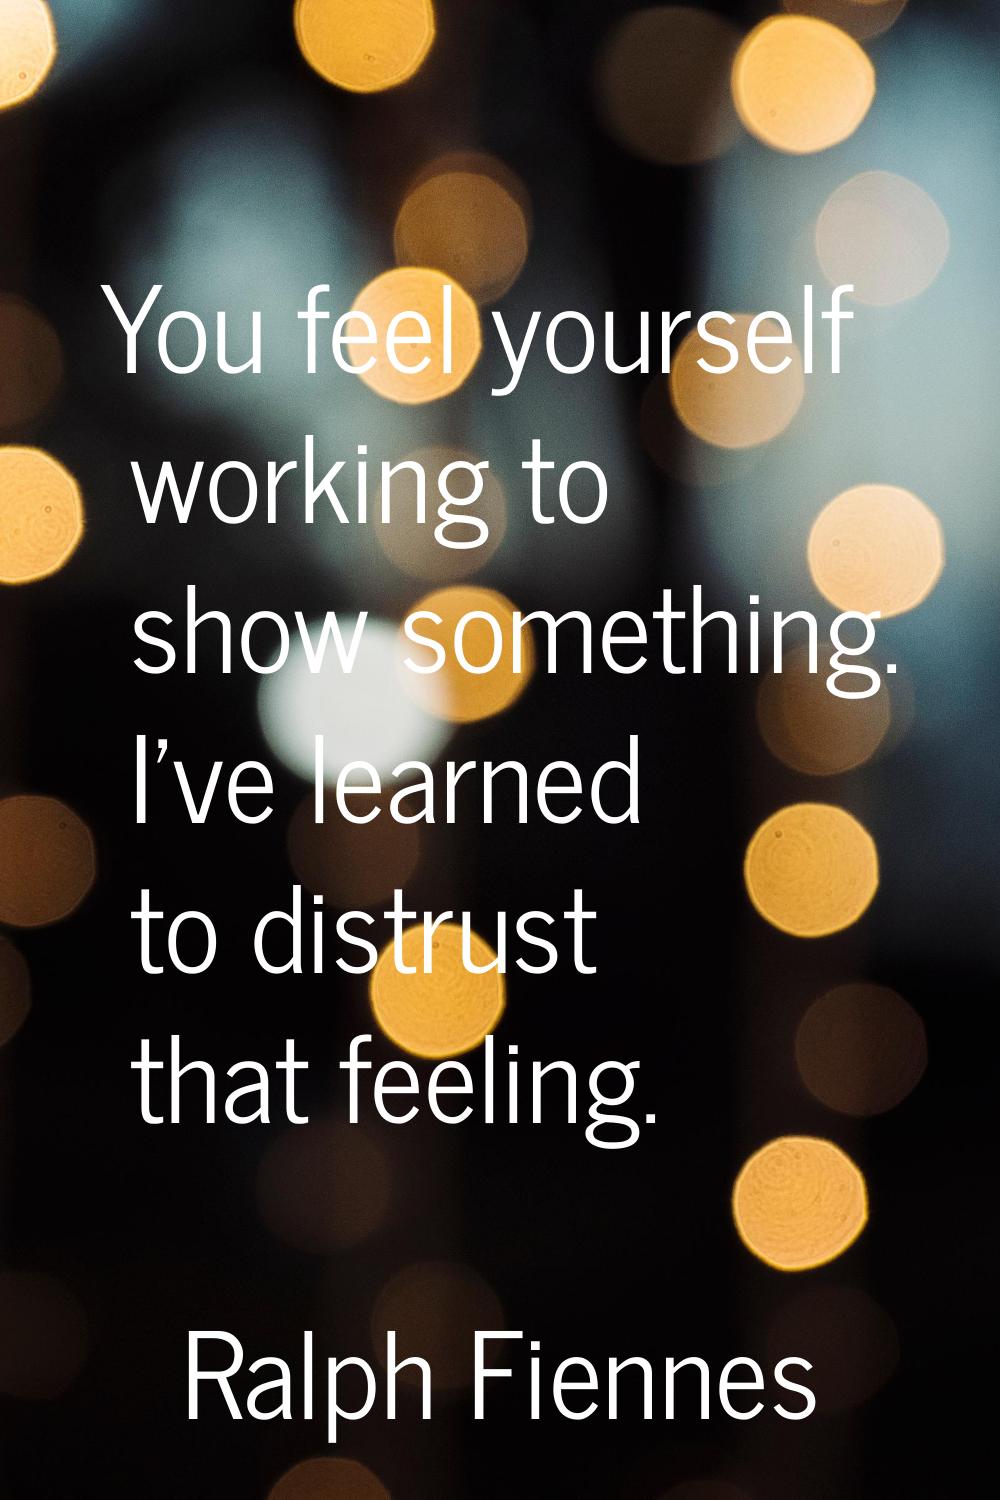 You feel yourself working to show something. I've learned to distrust that feeling.